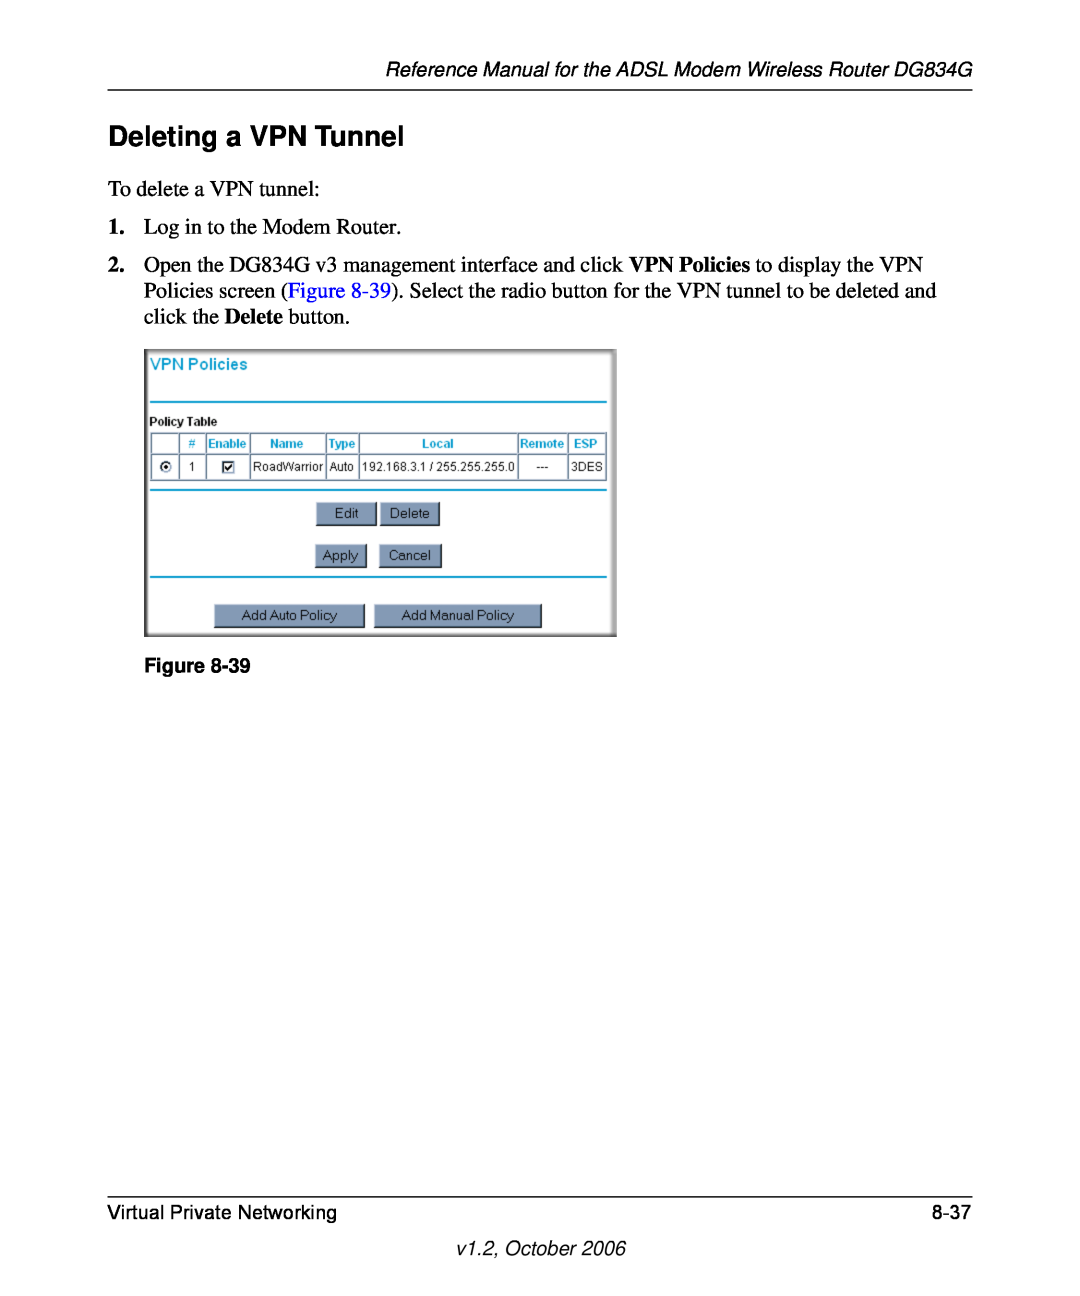 NETGEAR Deleting a VPN Tunnel, Reference Manual for the ADSL Modem Wireless Router DG834G, Virtual Private Networking 